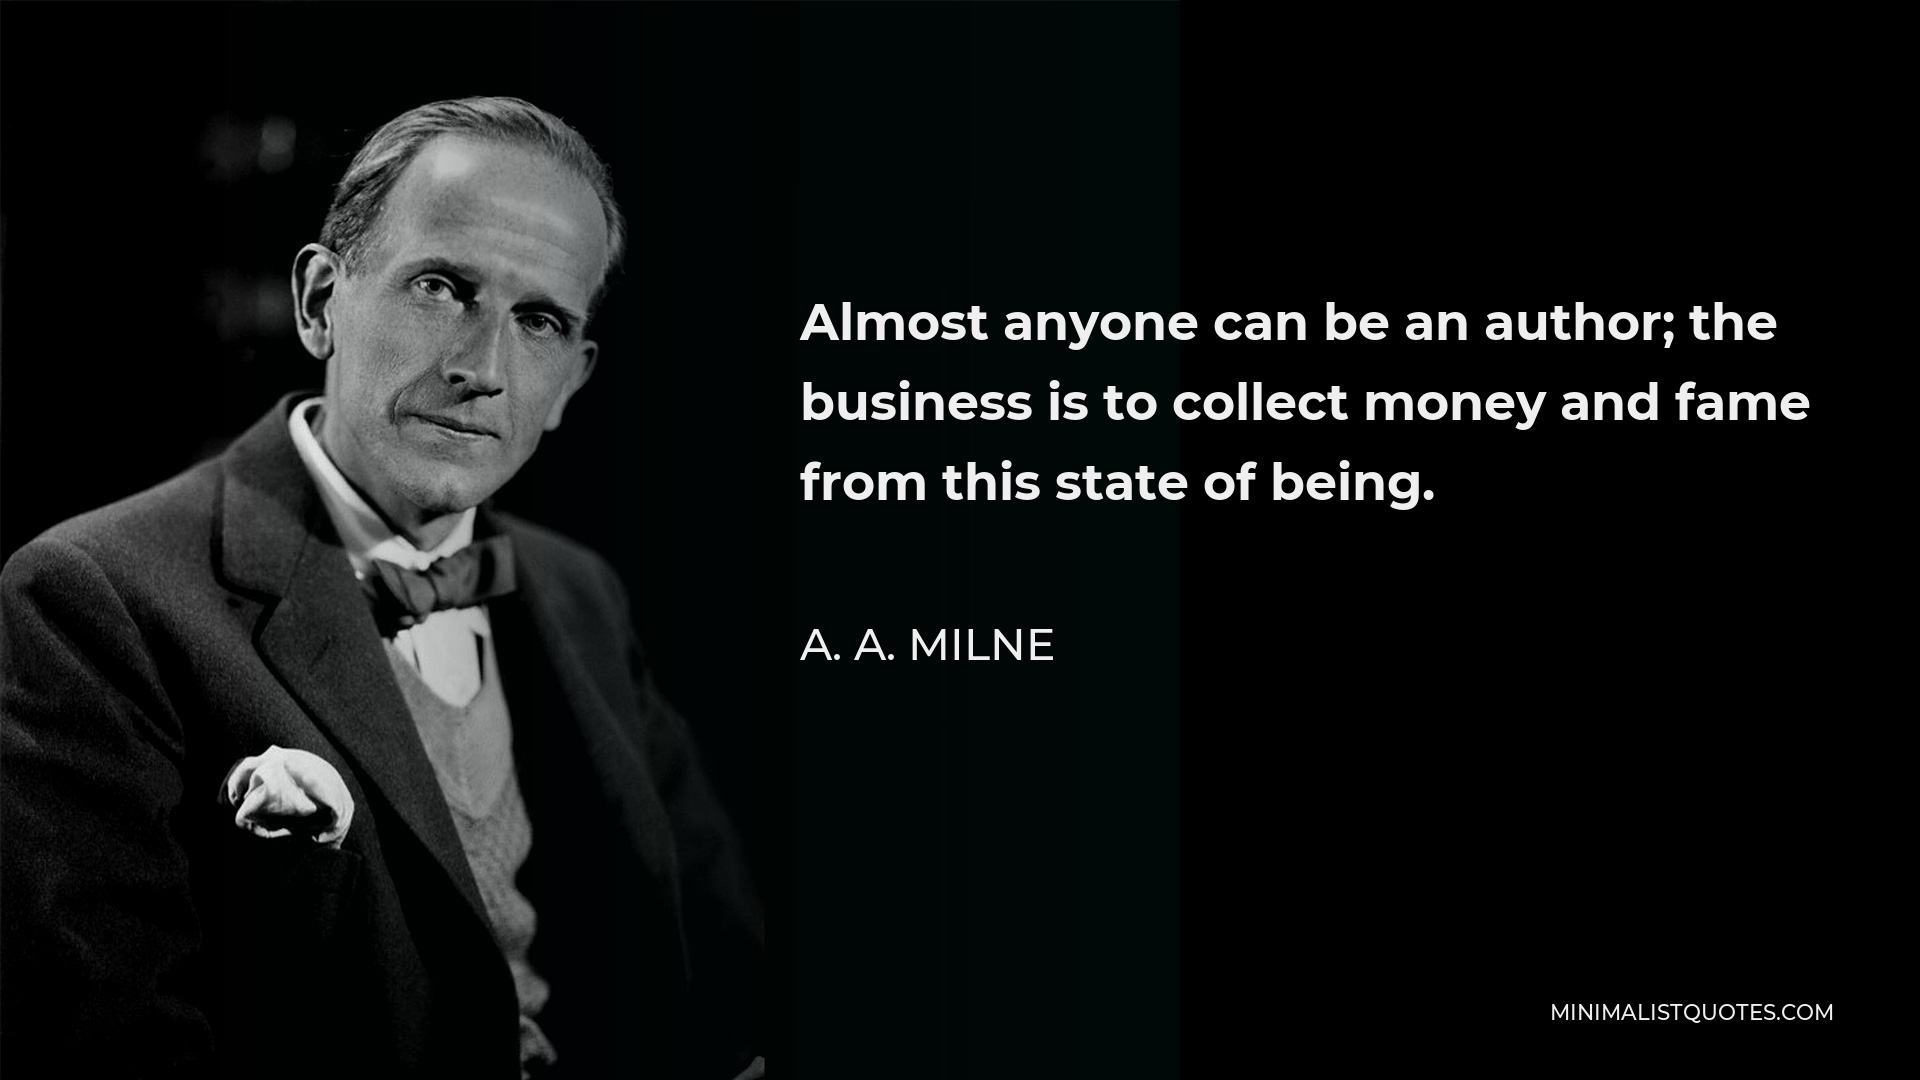 A. A. Milne Quote - Almost anyone can be an author; the business is to collect money and fame from this state of being.